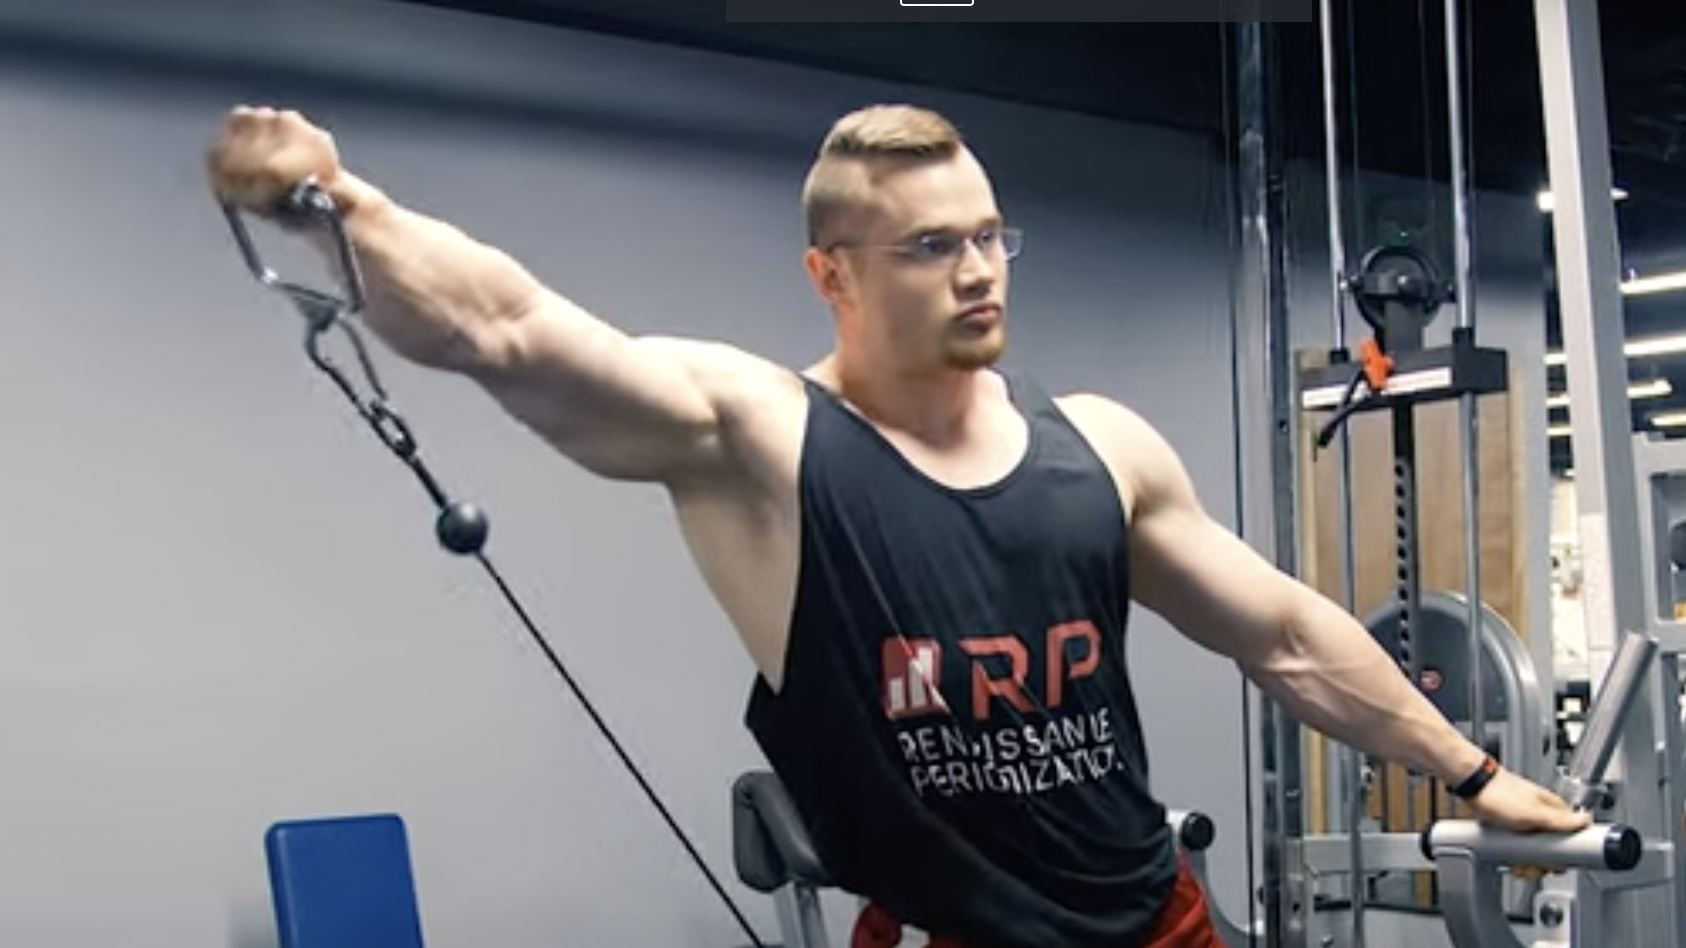 Leaning Cable Lateral Raise Exercise